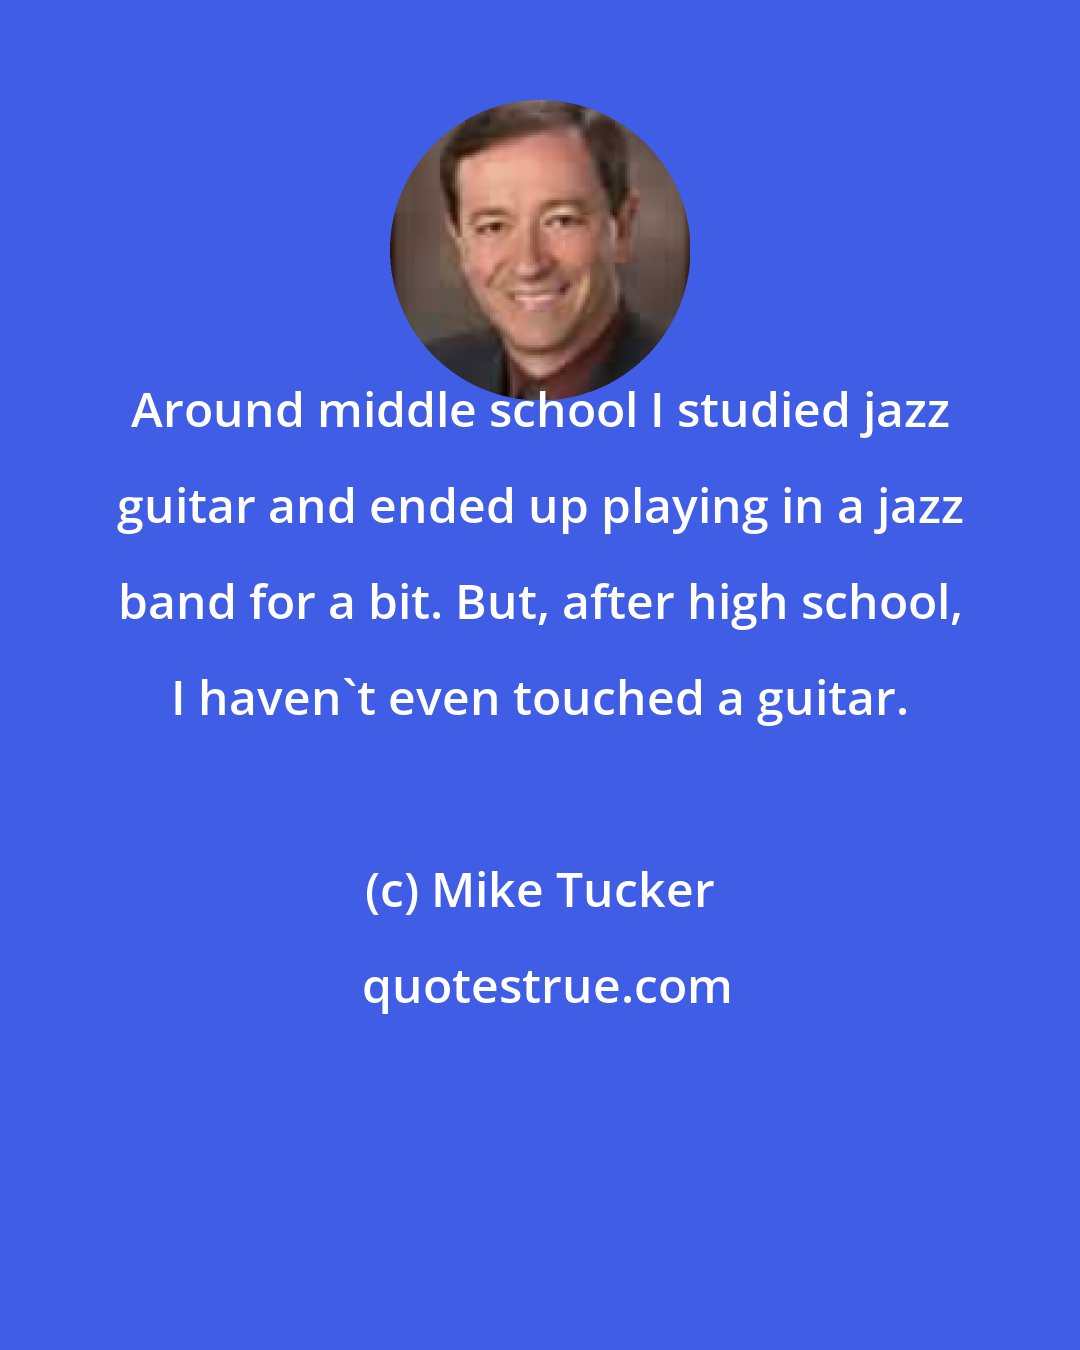 Mike Tucker: Around middle school I studied jazz guitar and ended up playing in a jazz band for a bit. But, after high school, I haven't even touched a guitar.